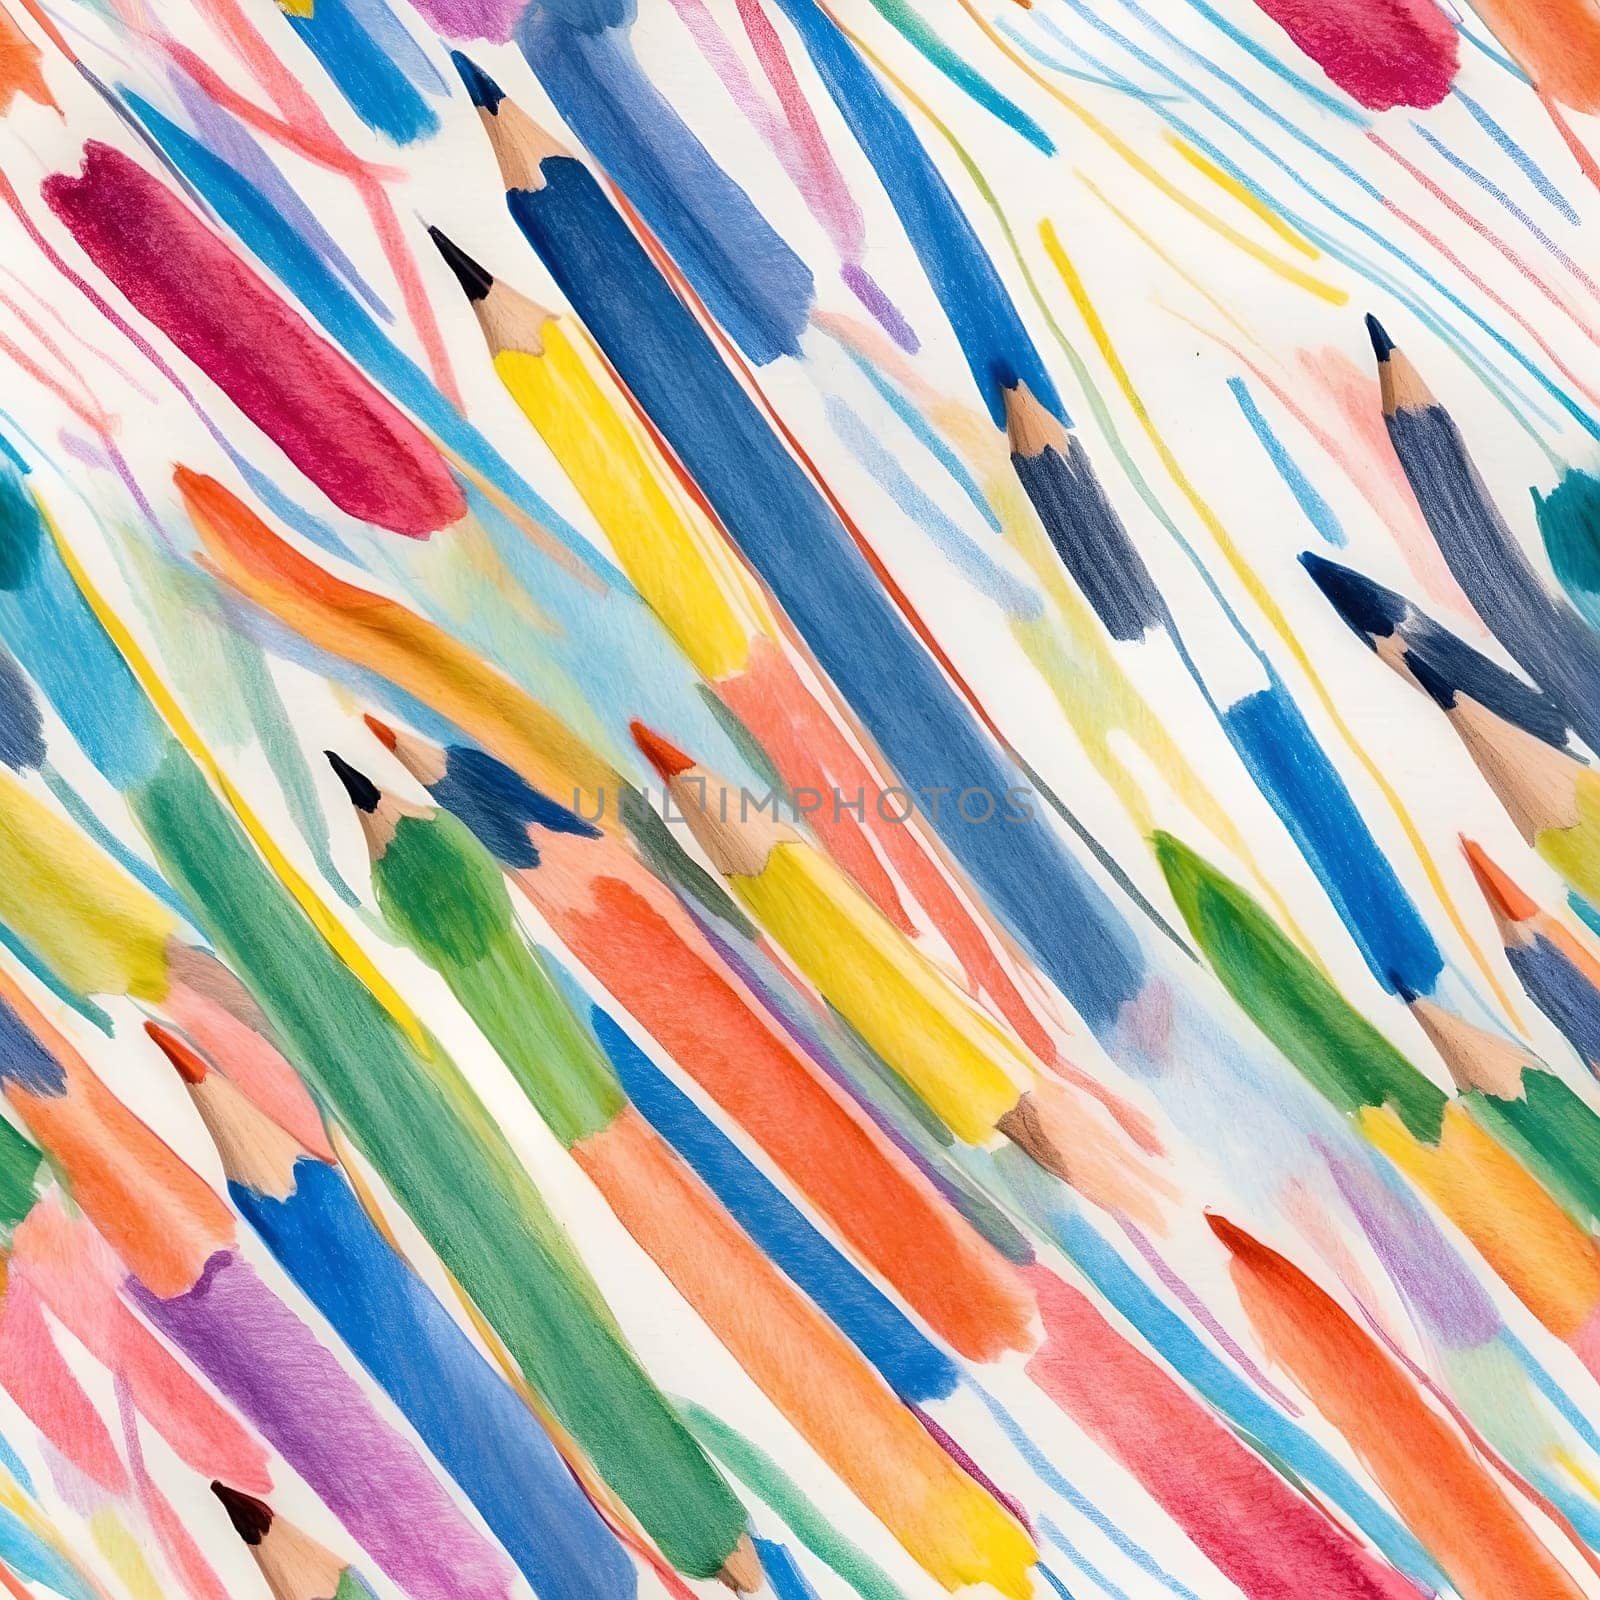 A visually striking painting featuring an assortment of brightly colored pencils arranged in a seamless pattern.